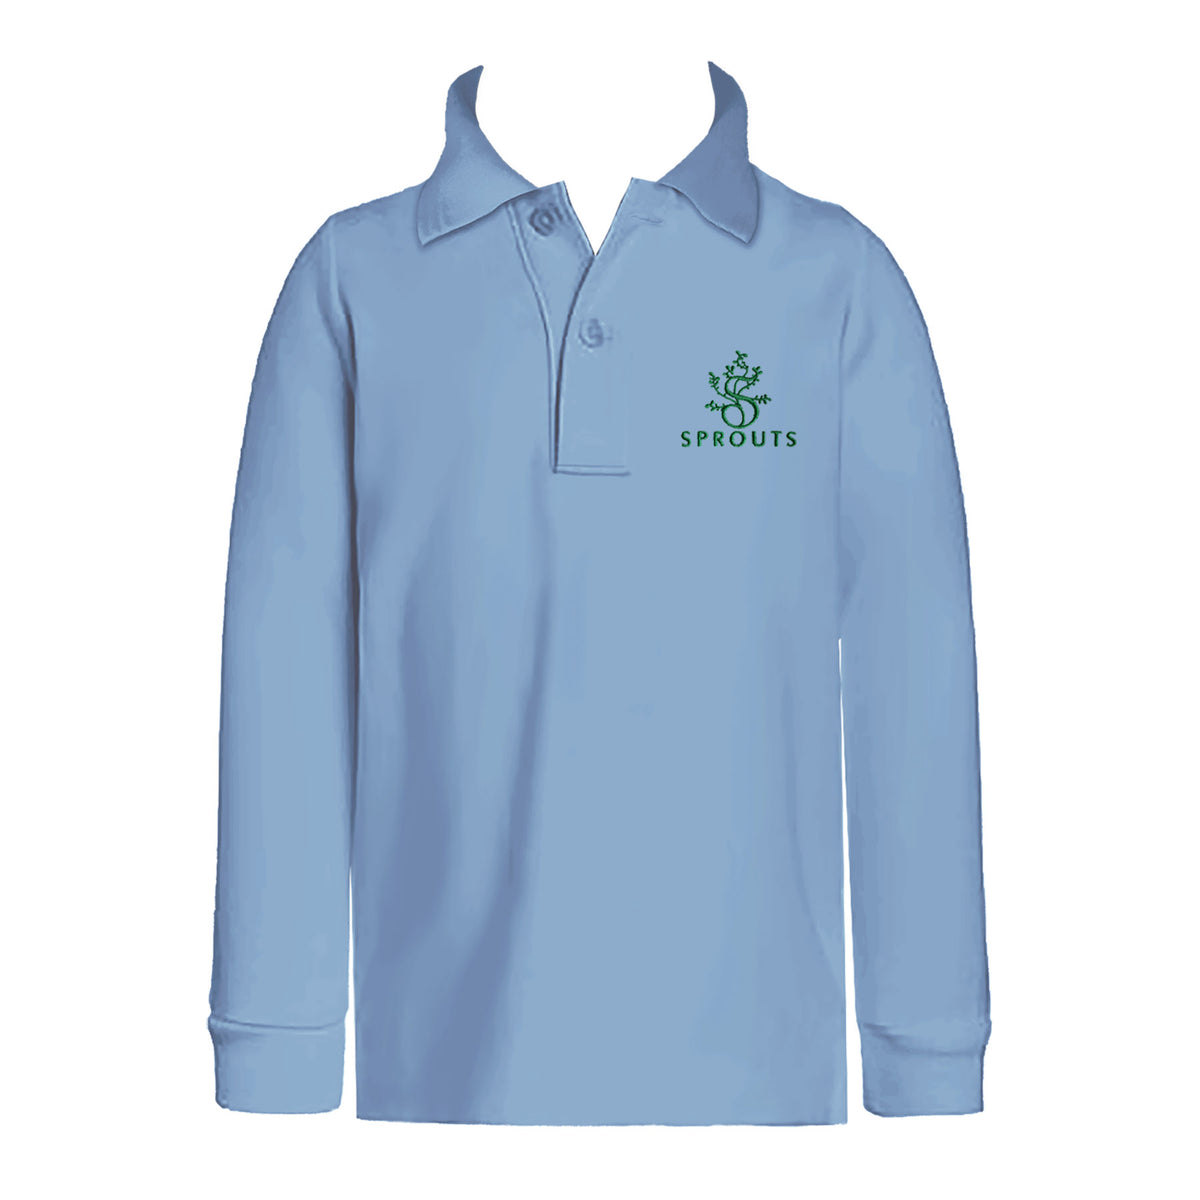 SPROUTS ACADEMY GOLF SHIRT, UNISEX, LONG SLEEVE, CHILD